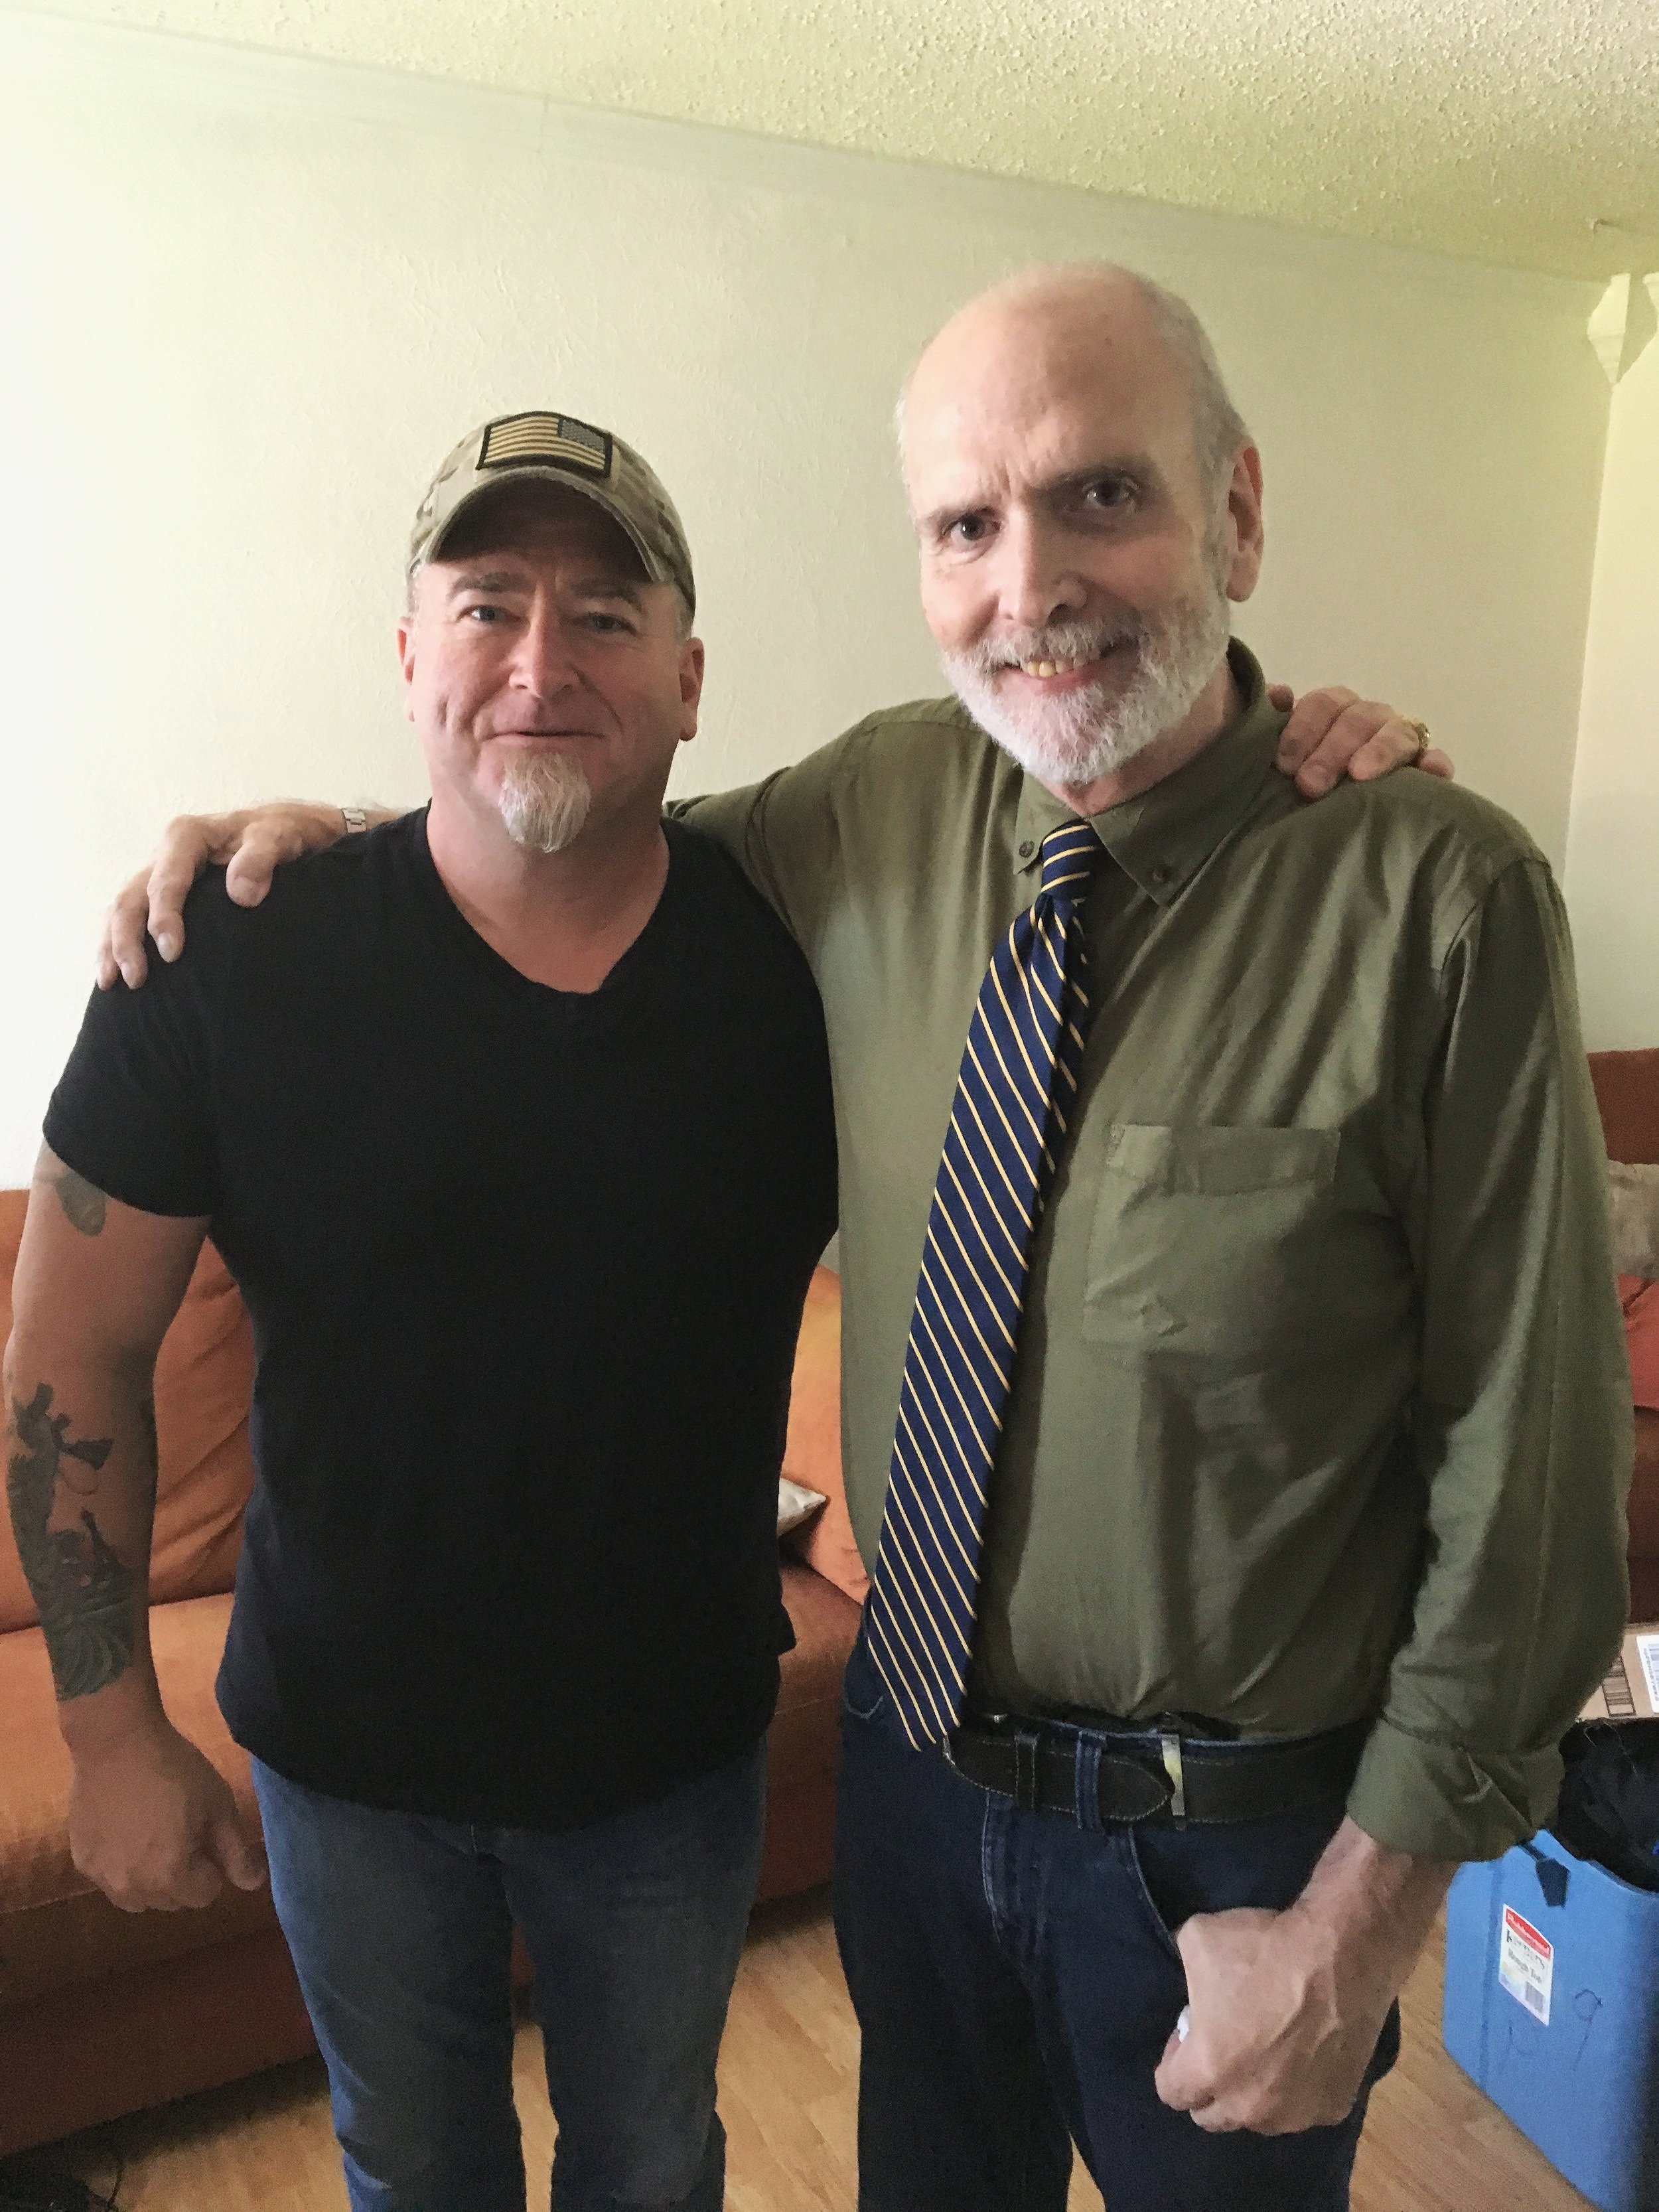  Terry Lovelace with former AATIP manager Luis “Lue” Elizondo, late June, 2019 